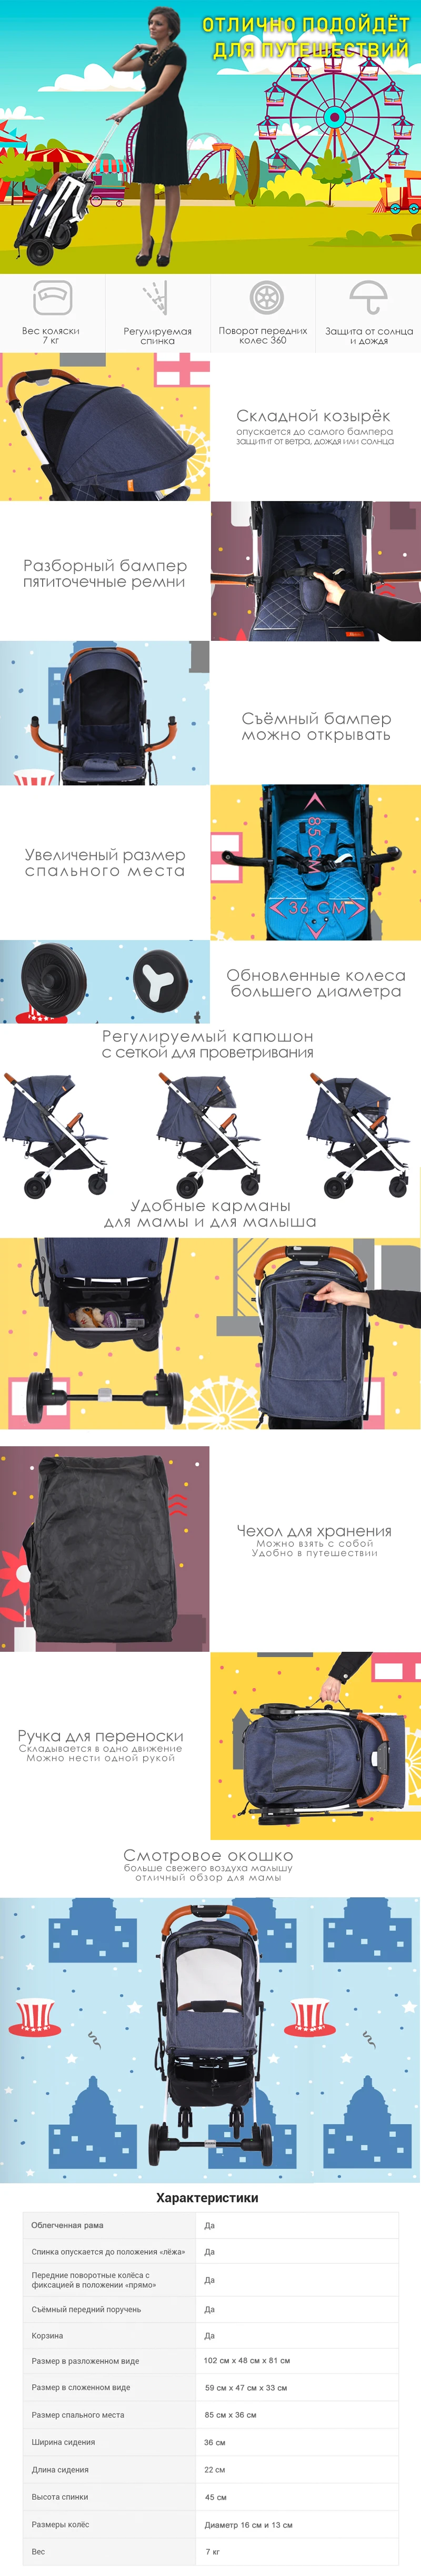 Babalo YOYAPLUS baby Stroller Gratis 12 Foldable Lightweight and convenient